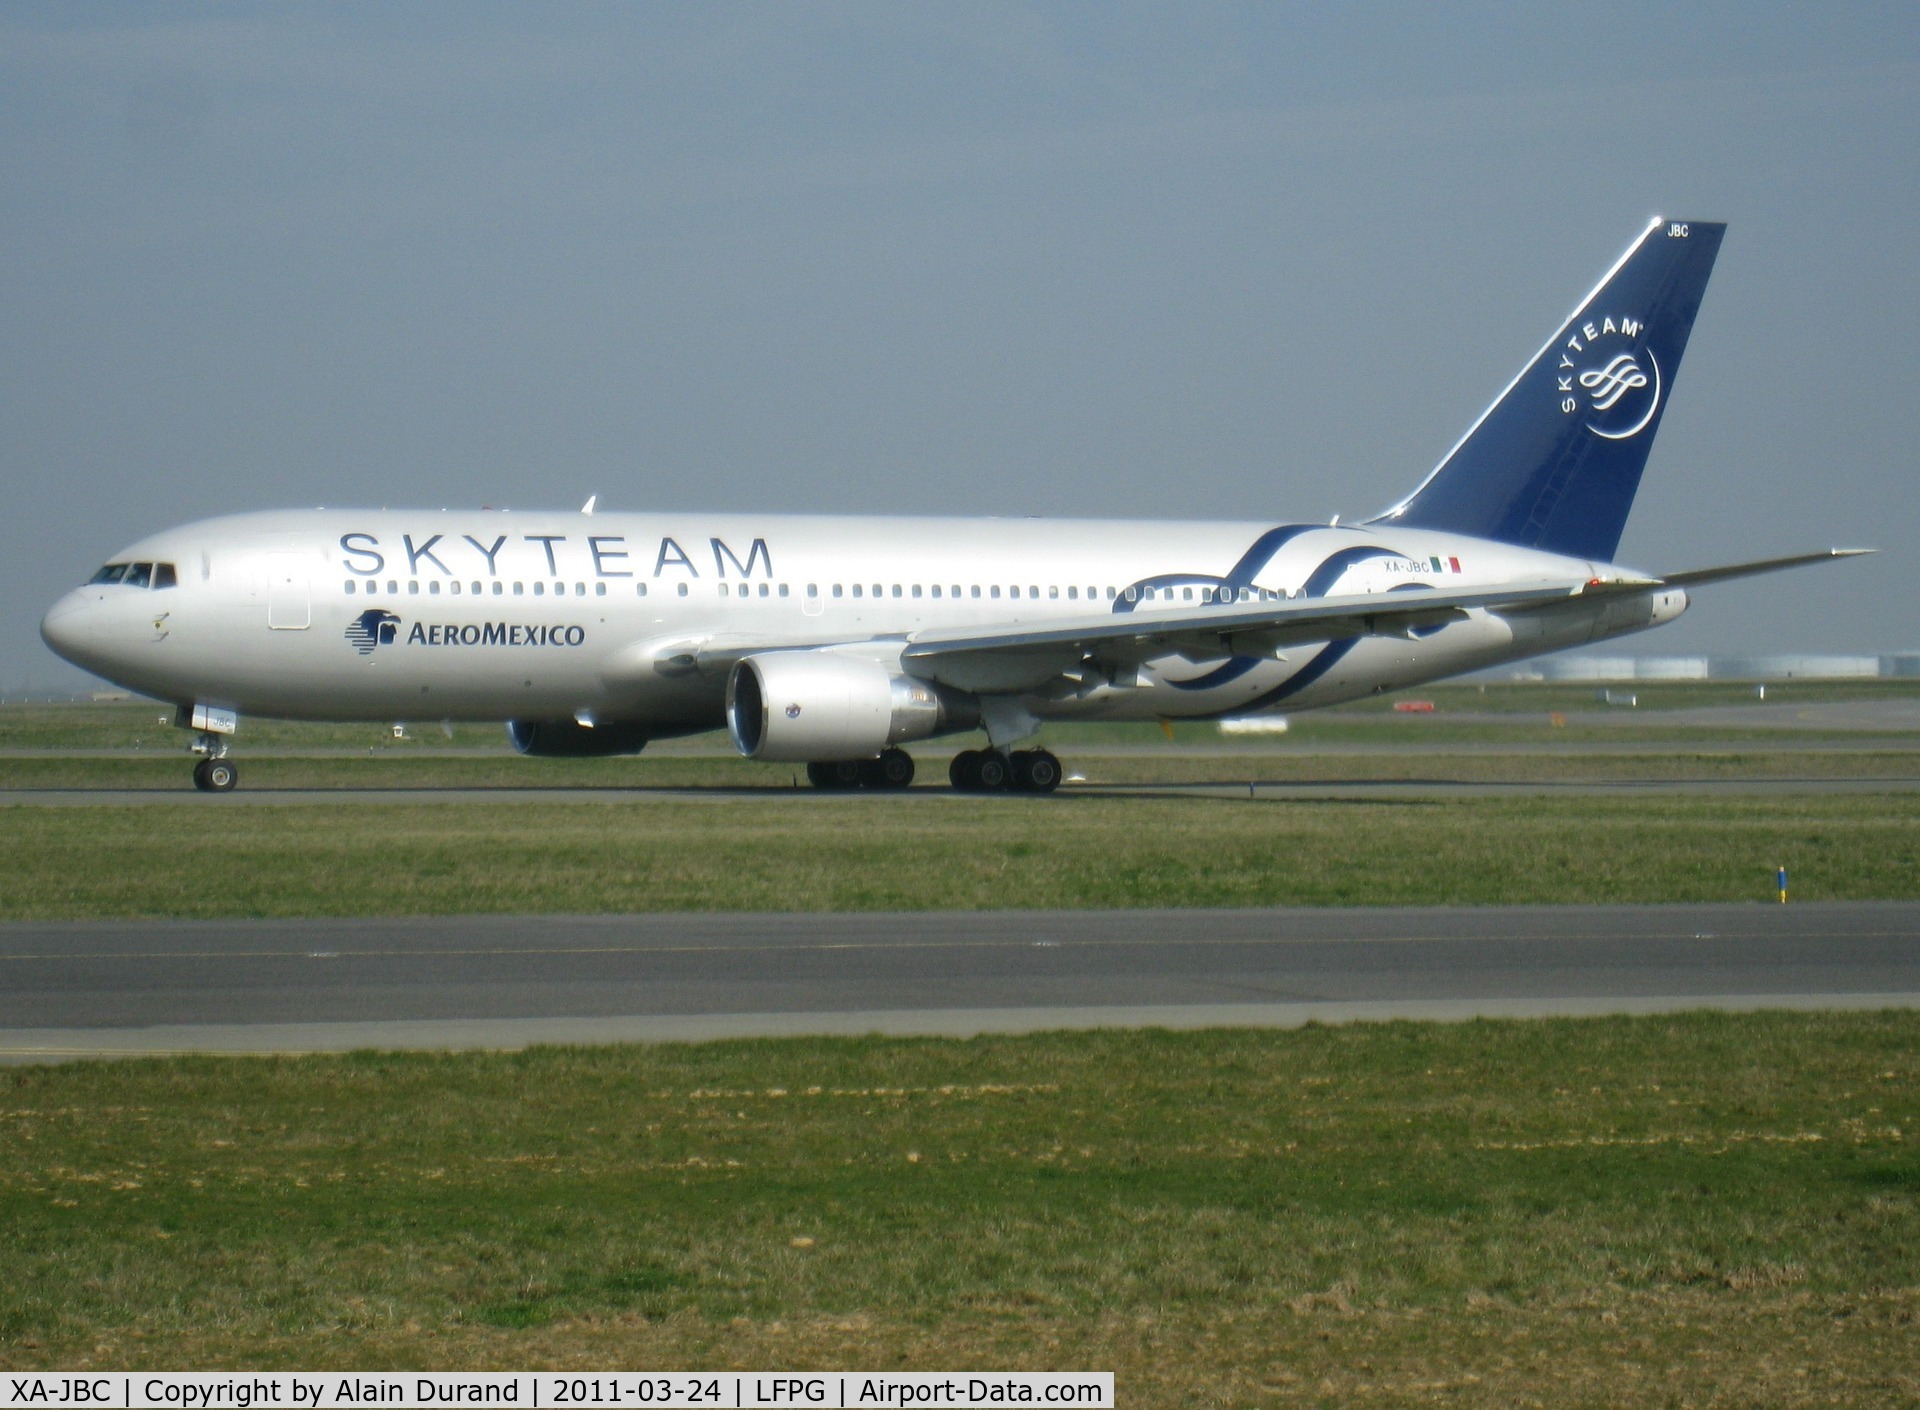 XA-JBC, 1990 Boeing 767-284/ER C/N 24762/307, Originally ordered by Olympic Airways but not taken-up and was handed over to Lan Chile in 1990 as CC-CEY. Now acting as the airline's embassador in Skyteam dress, Bravo-Charlie joined AM in 1991 as XA-RVY and was re-registered in 1998